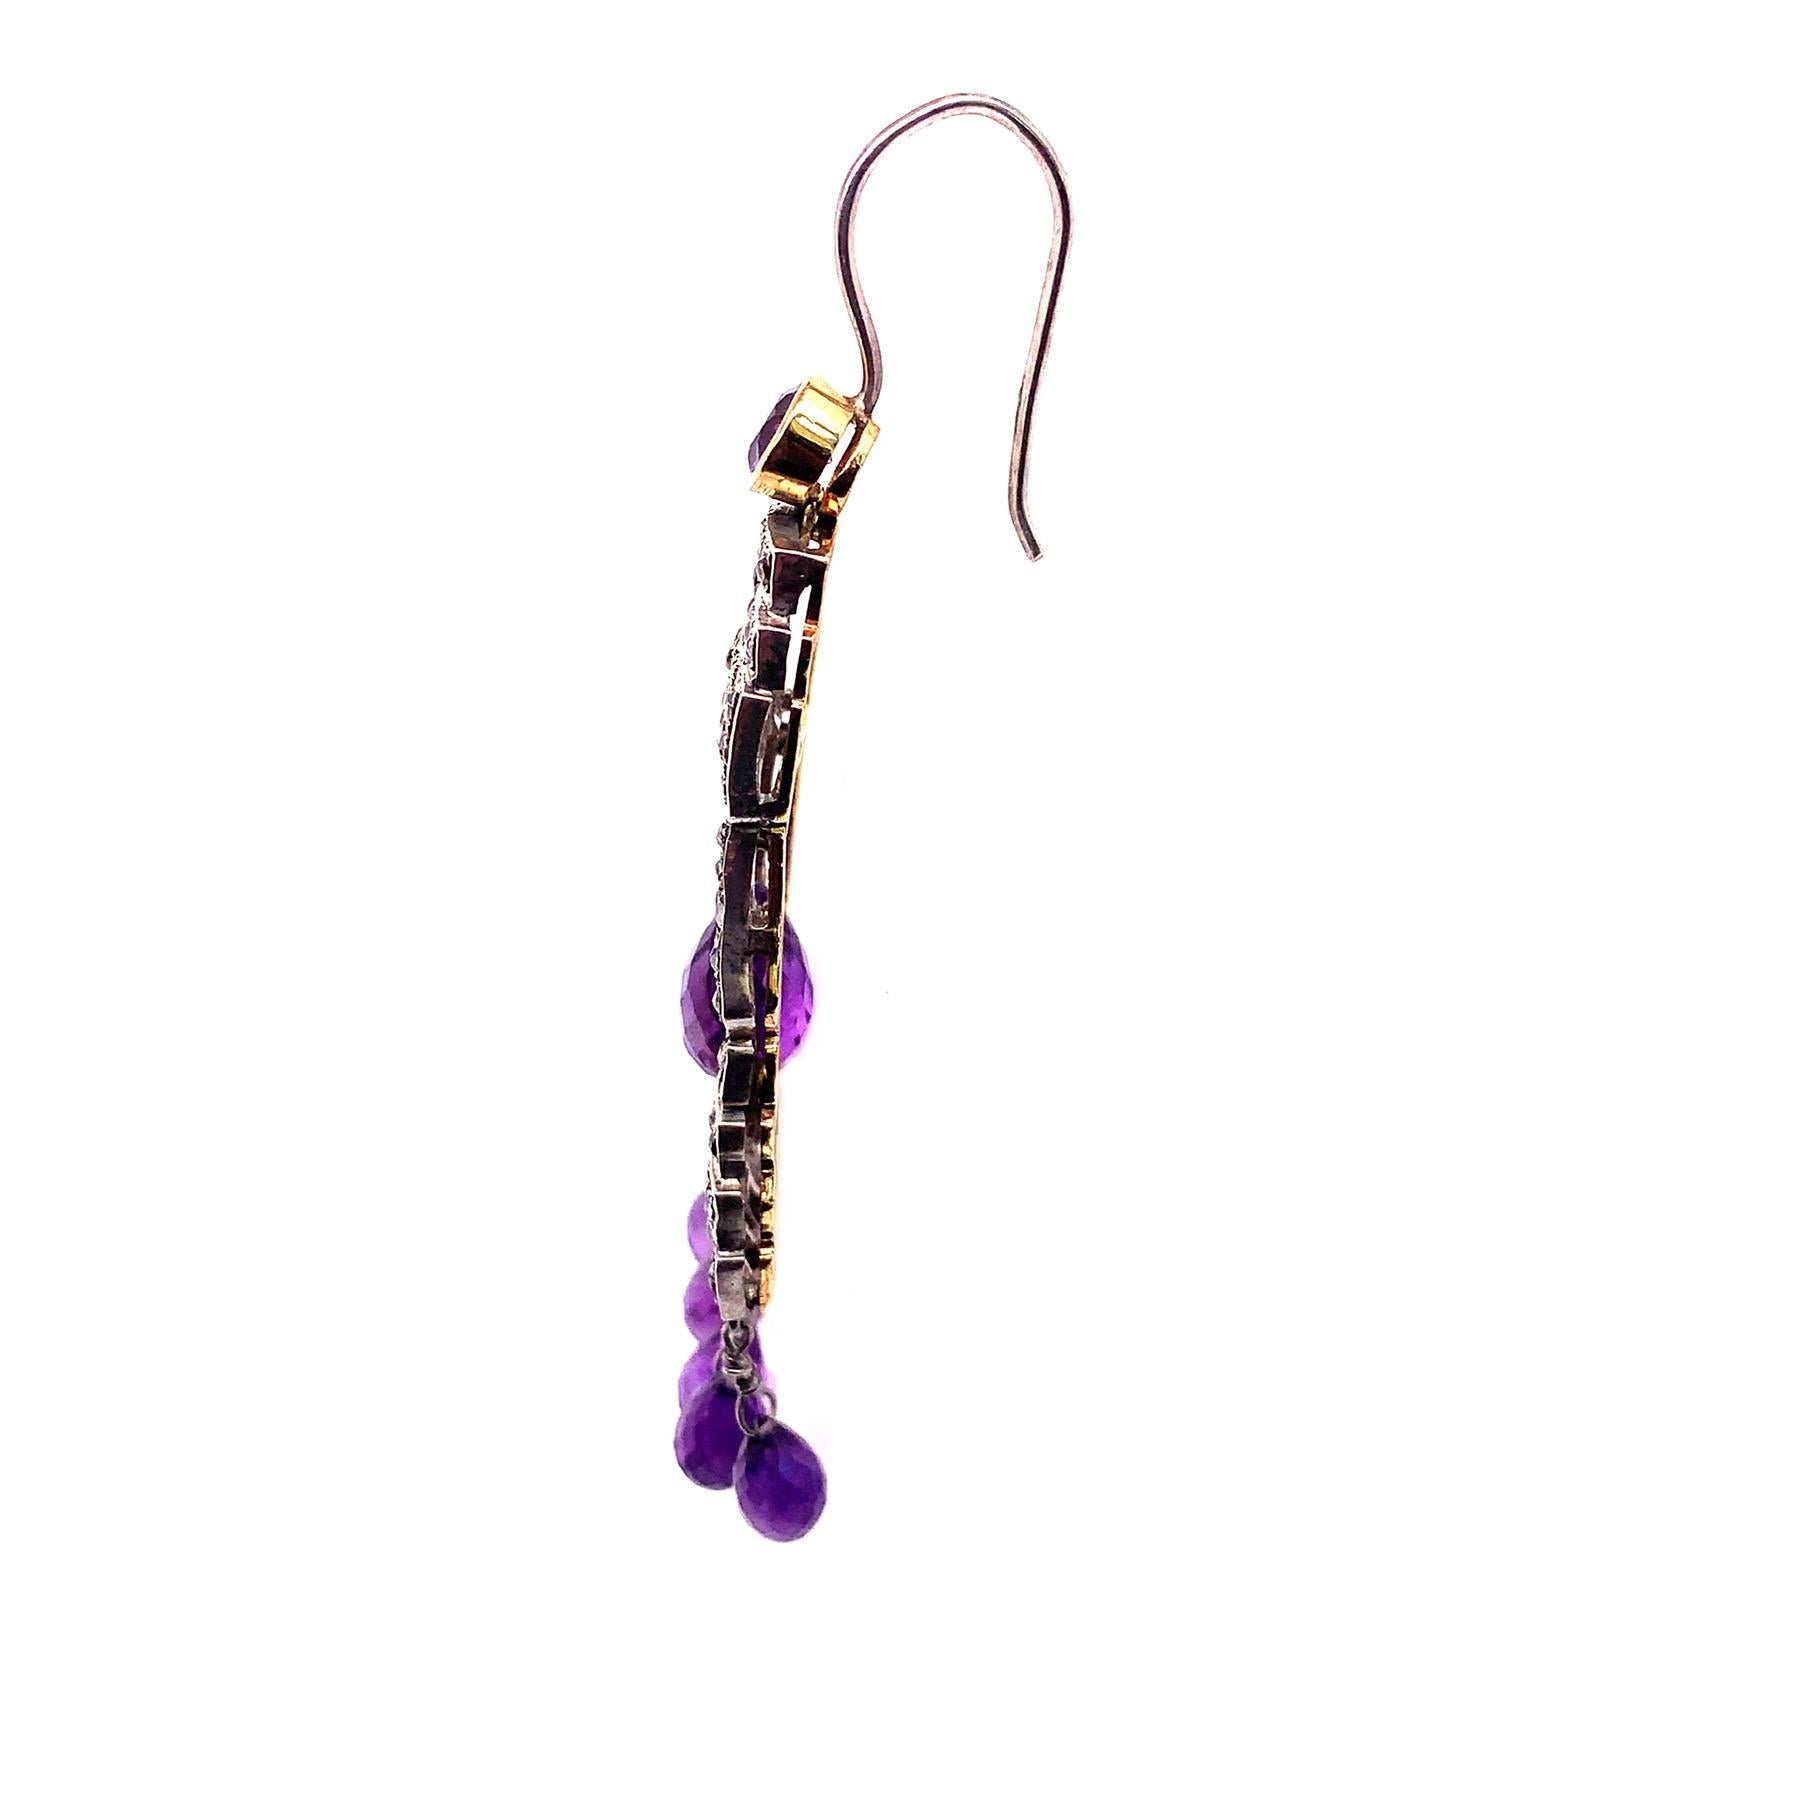 Rustic Collection

Amethyst drops and rustic Diamonds set in Sterling Silver.